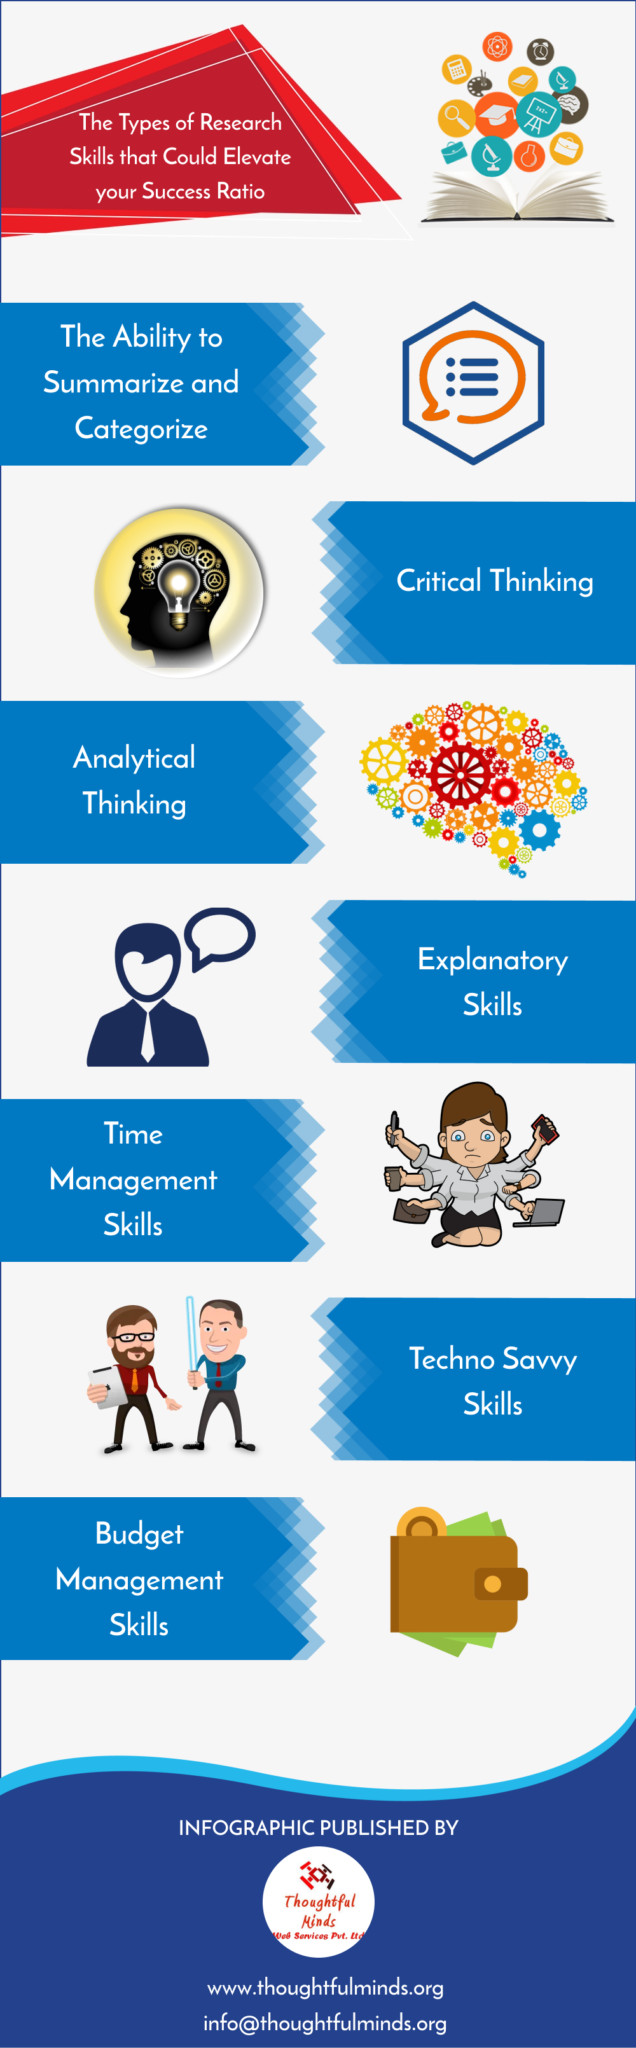 key skills of research executive